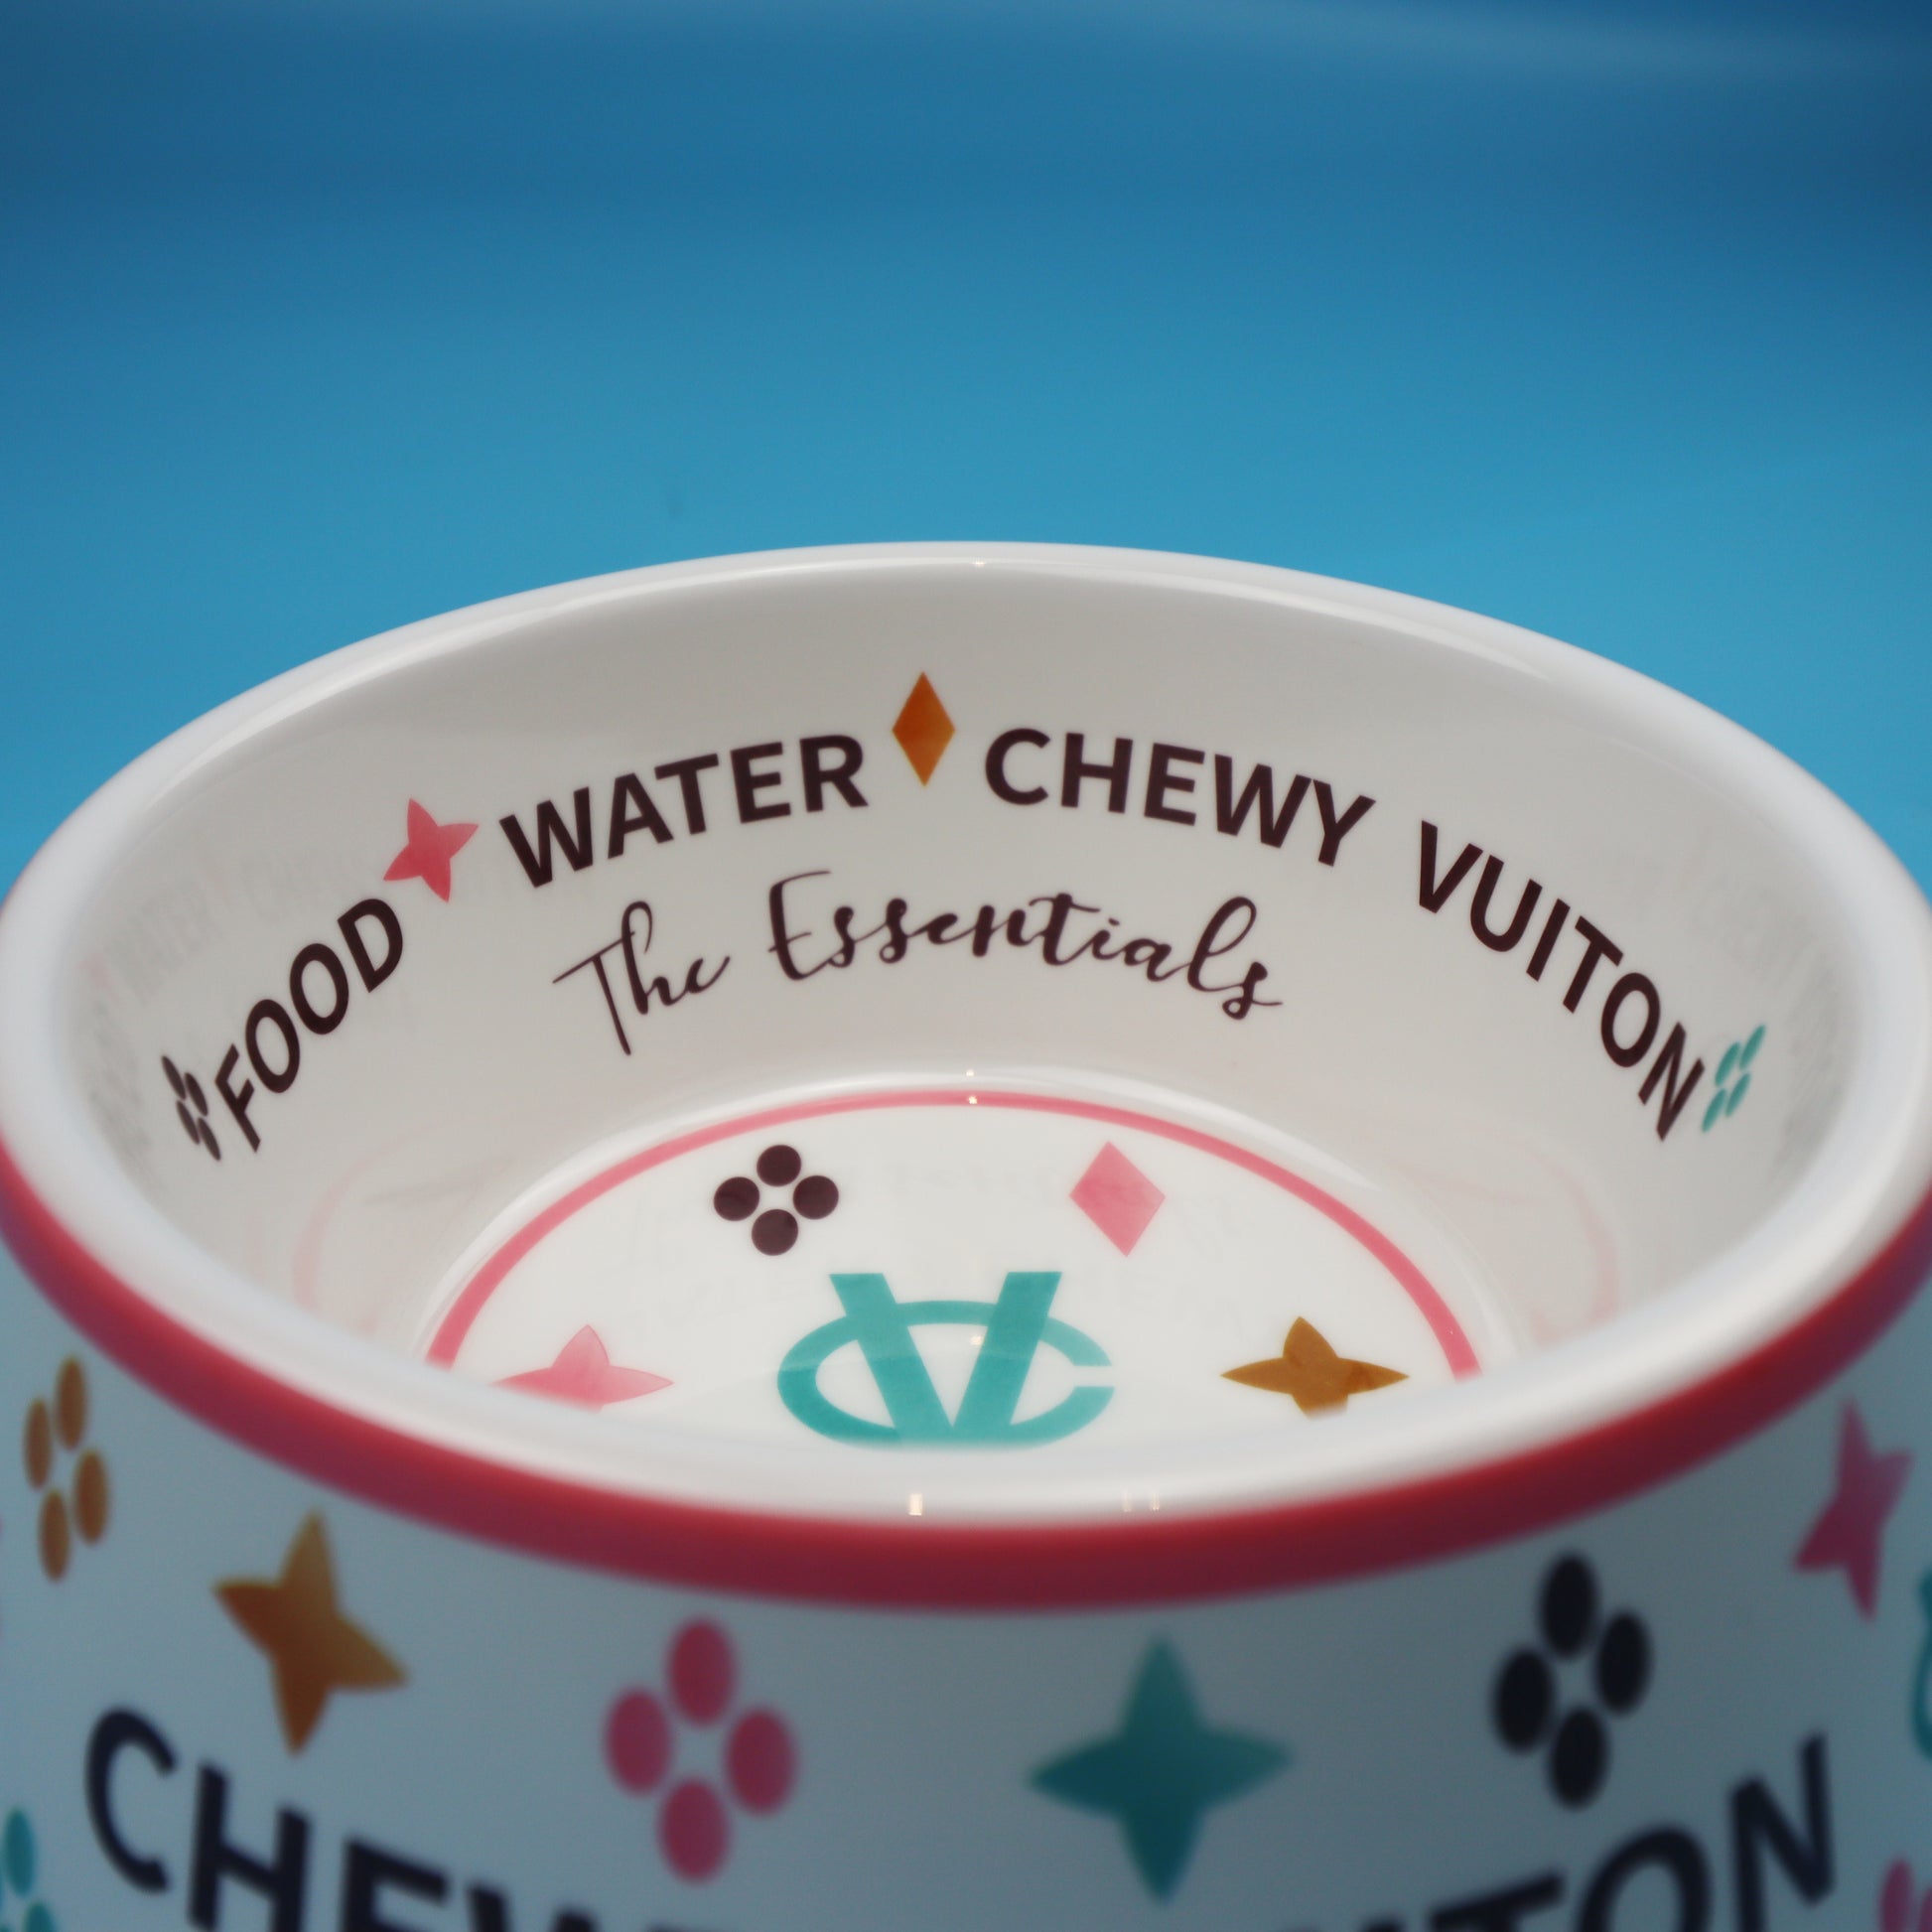 Colorful Chewy Vuitton Dog Bowl